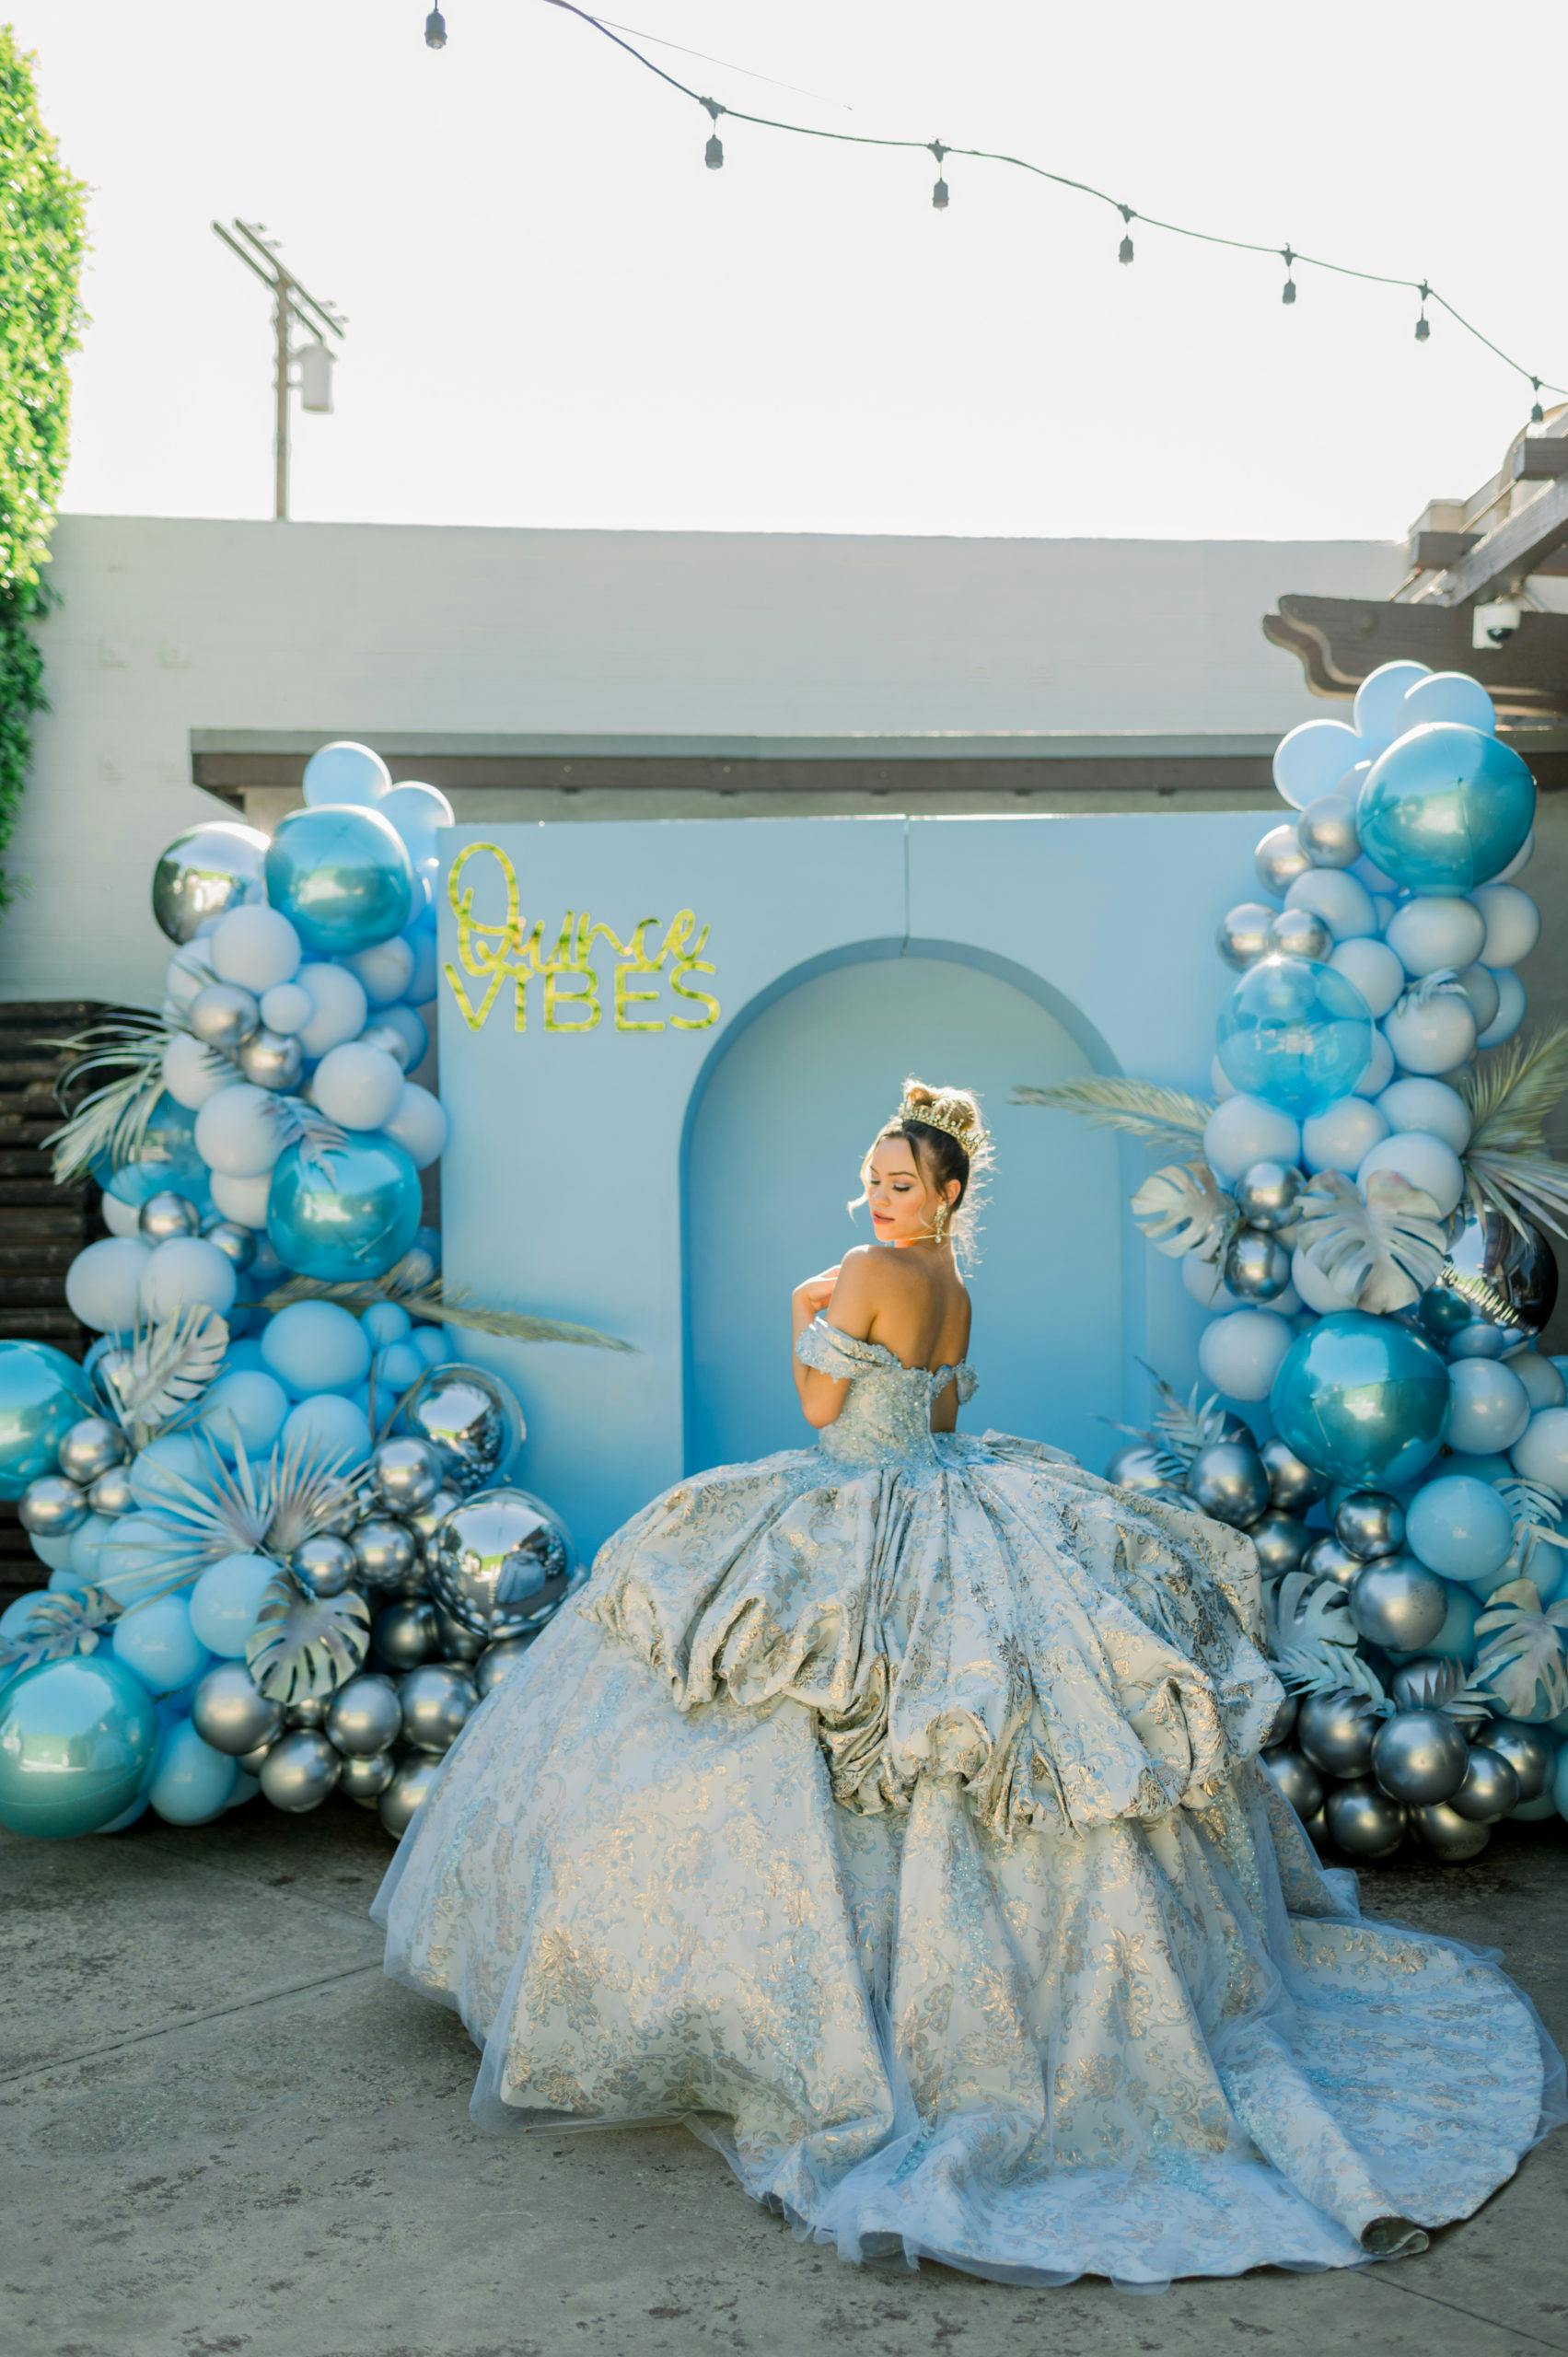 Quinceañera Girl in Cinderella-Style Dress in Front of Blue Boho-Chic Backdrop With Balloons | PartySlate